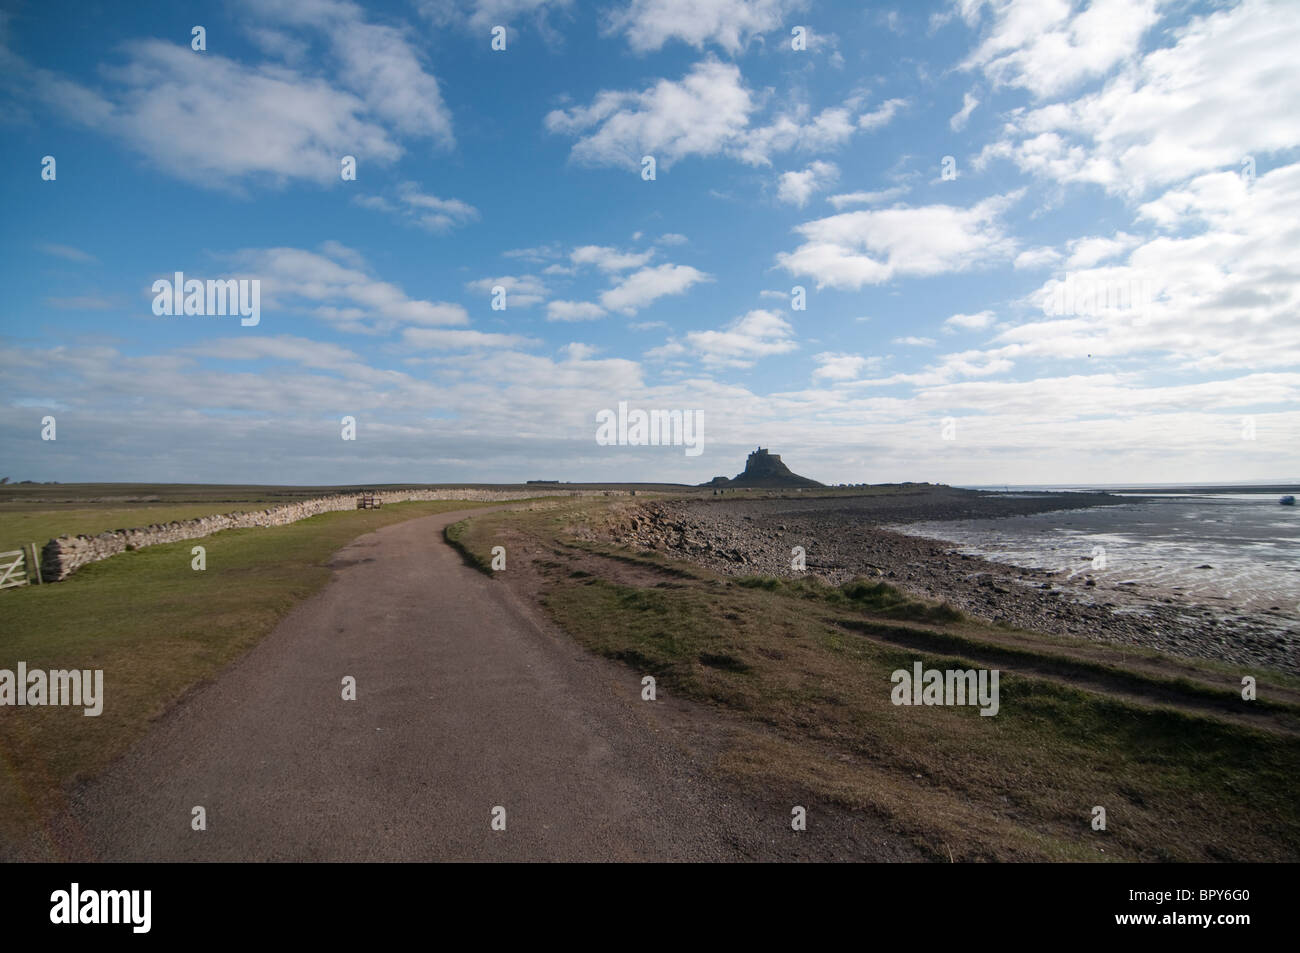 The distant castle of Lindisfarne on Holy Island along the North Sea in Northumberland, England. Stock Photo